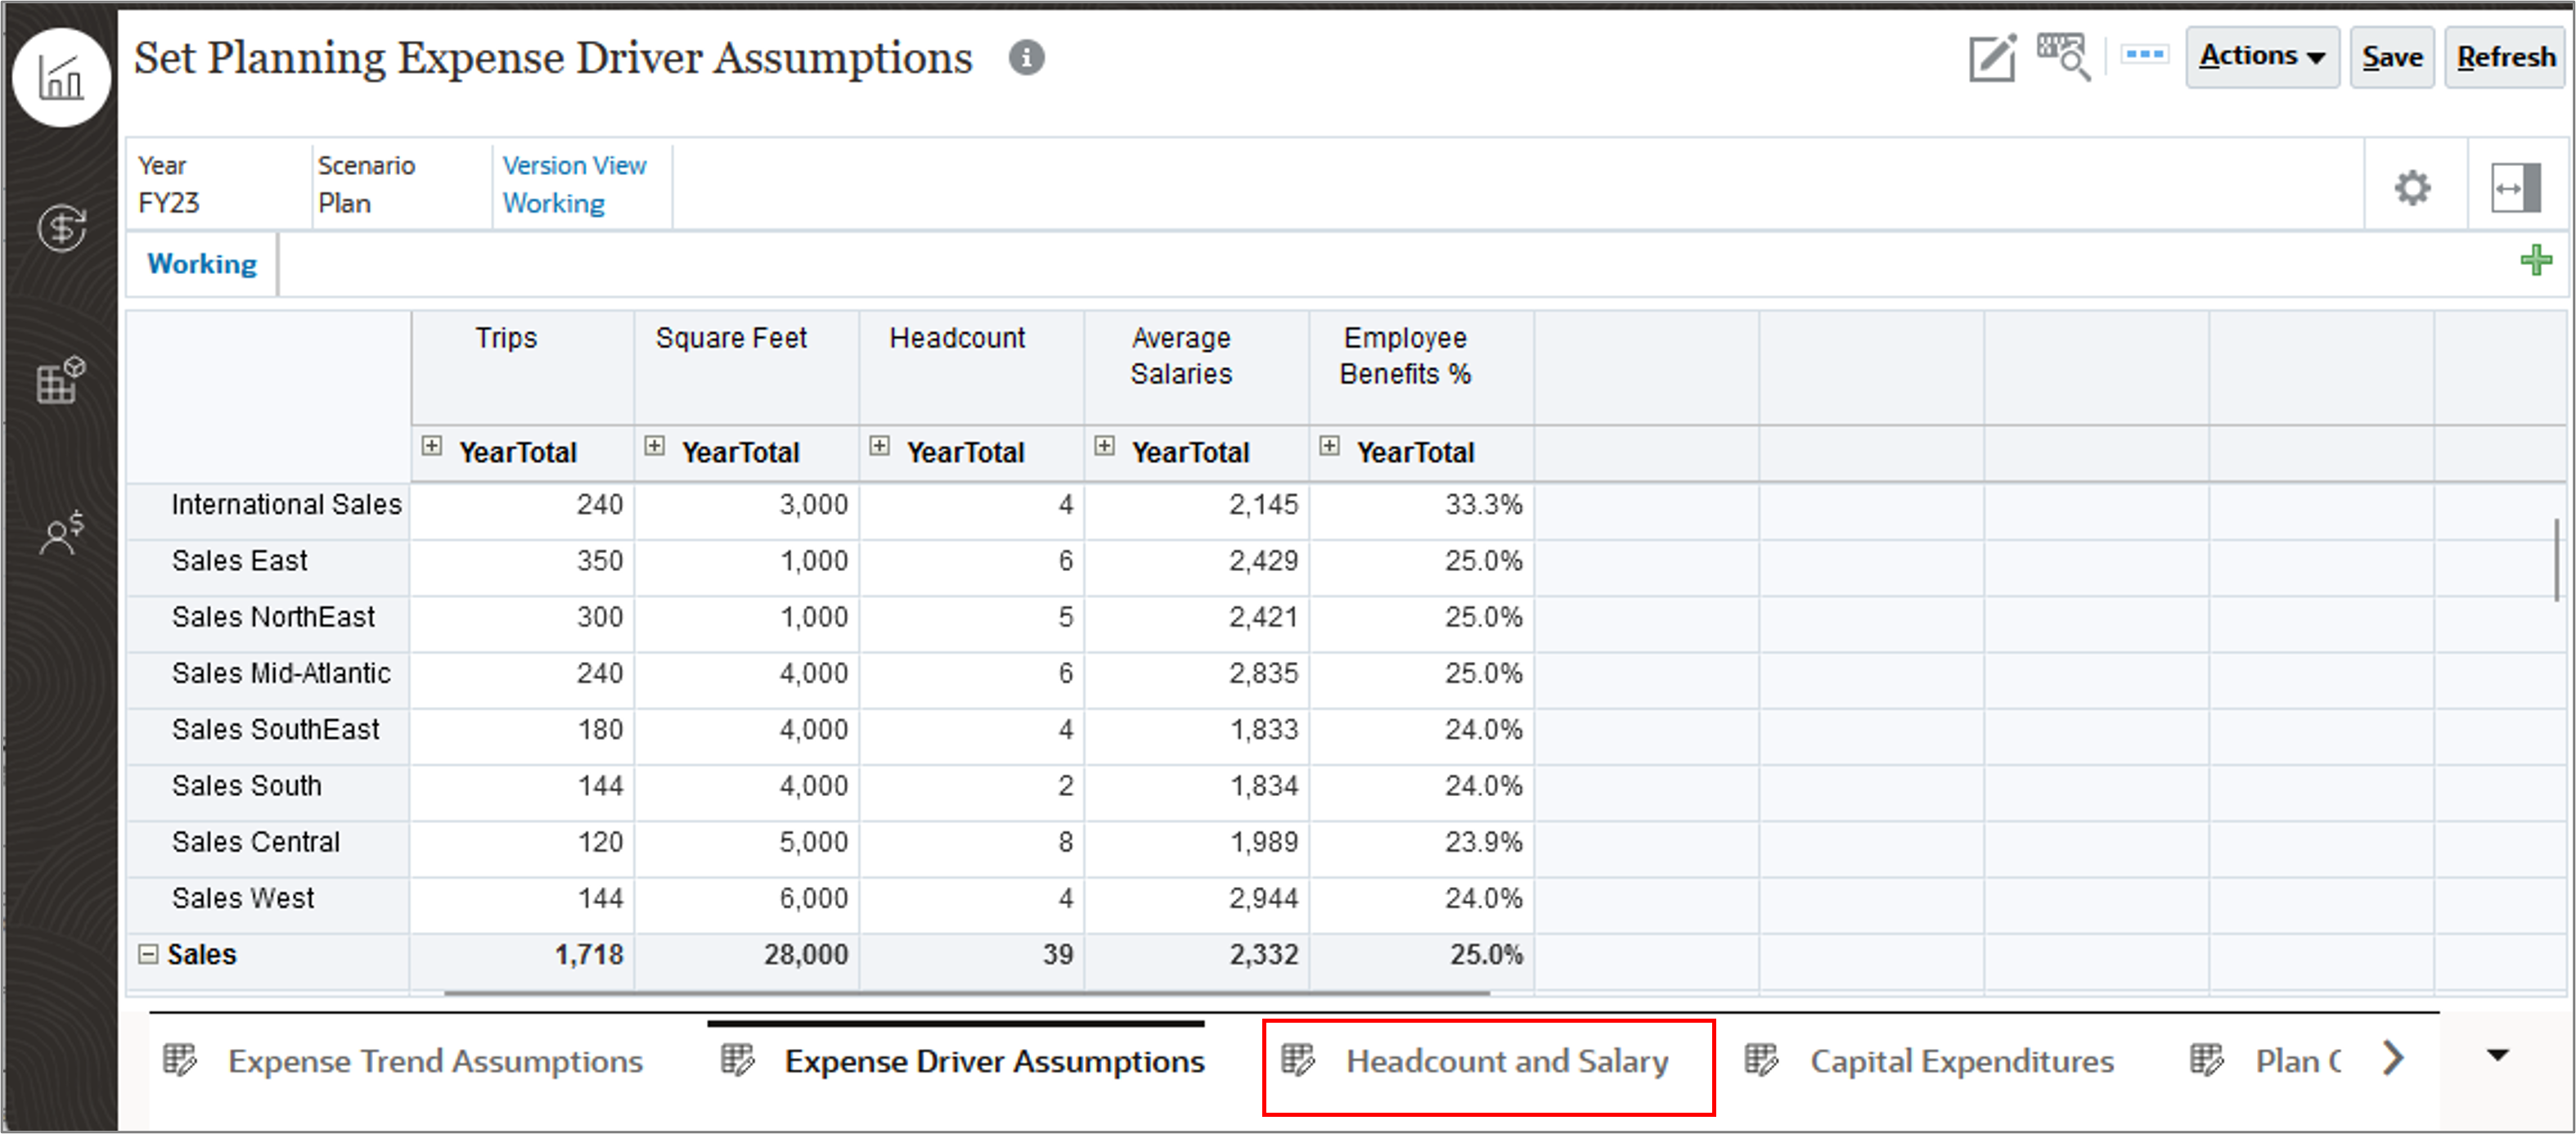 Set Planning Expense Driver Assumptions with Headcount and Salary tab highlighted